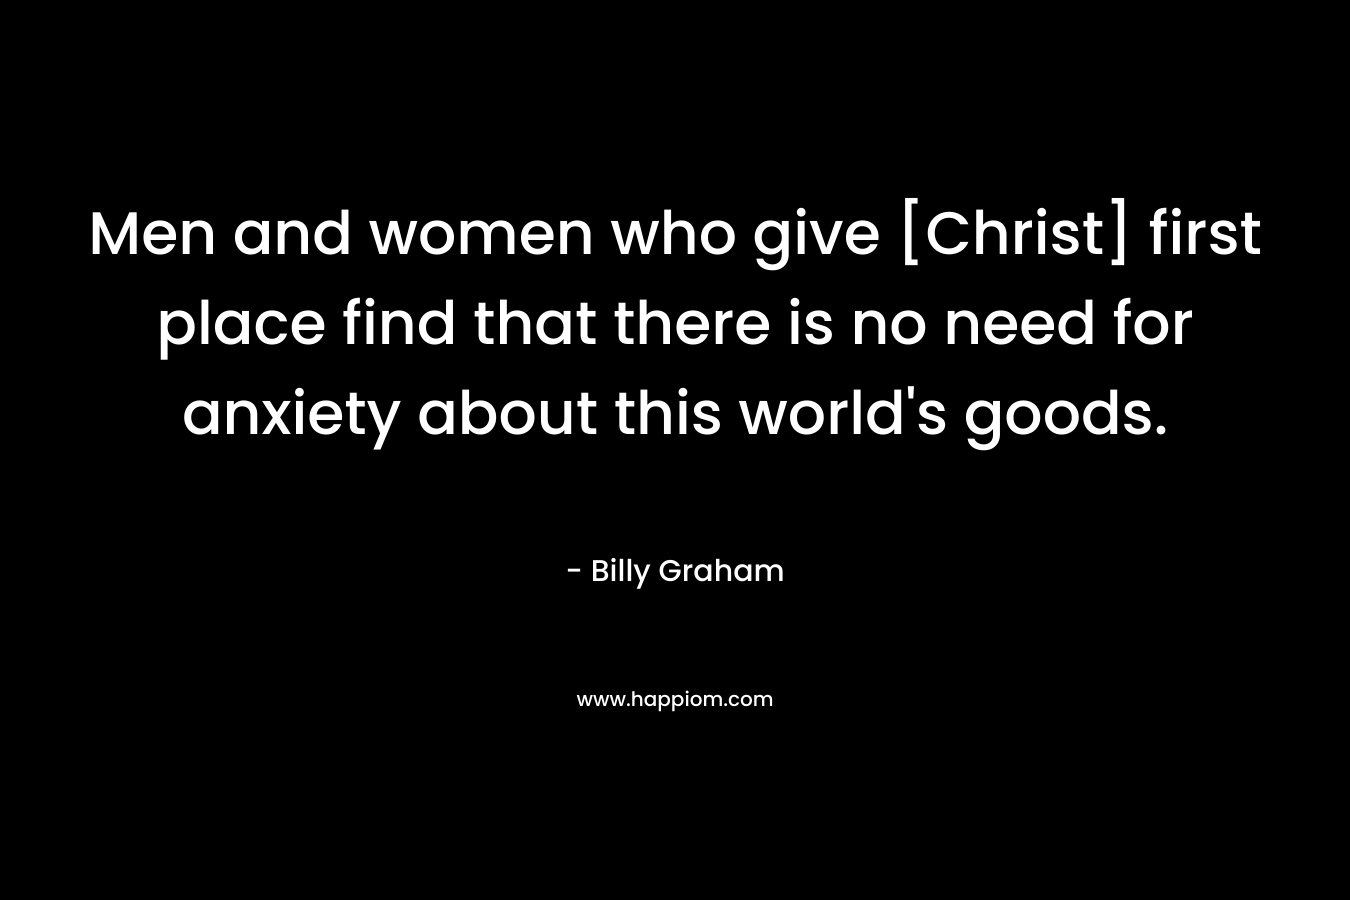 Men and women who give [Christ] first place find that there is no need for anxiety about this world’s goods. – Billy Graham